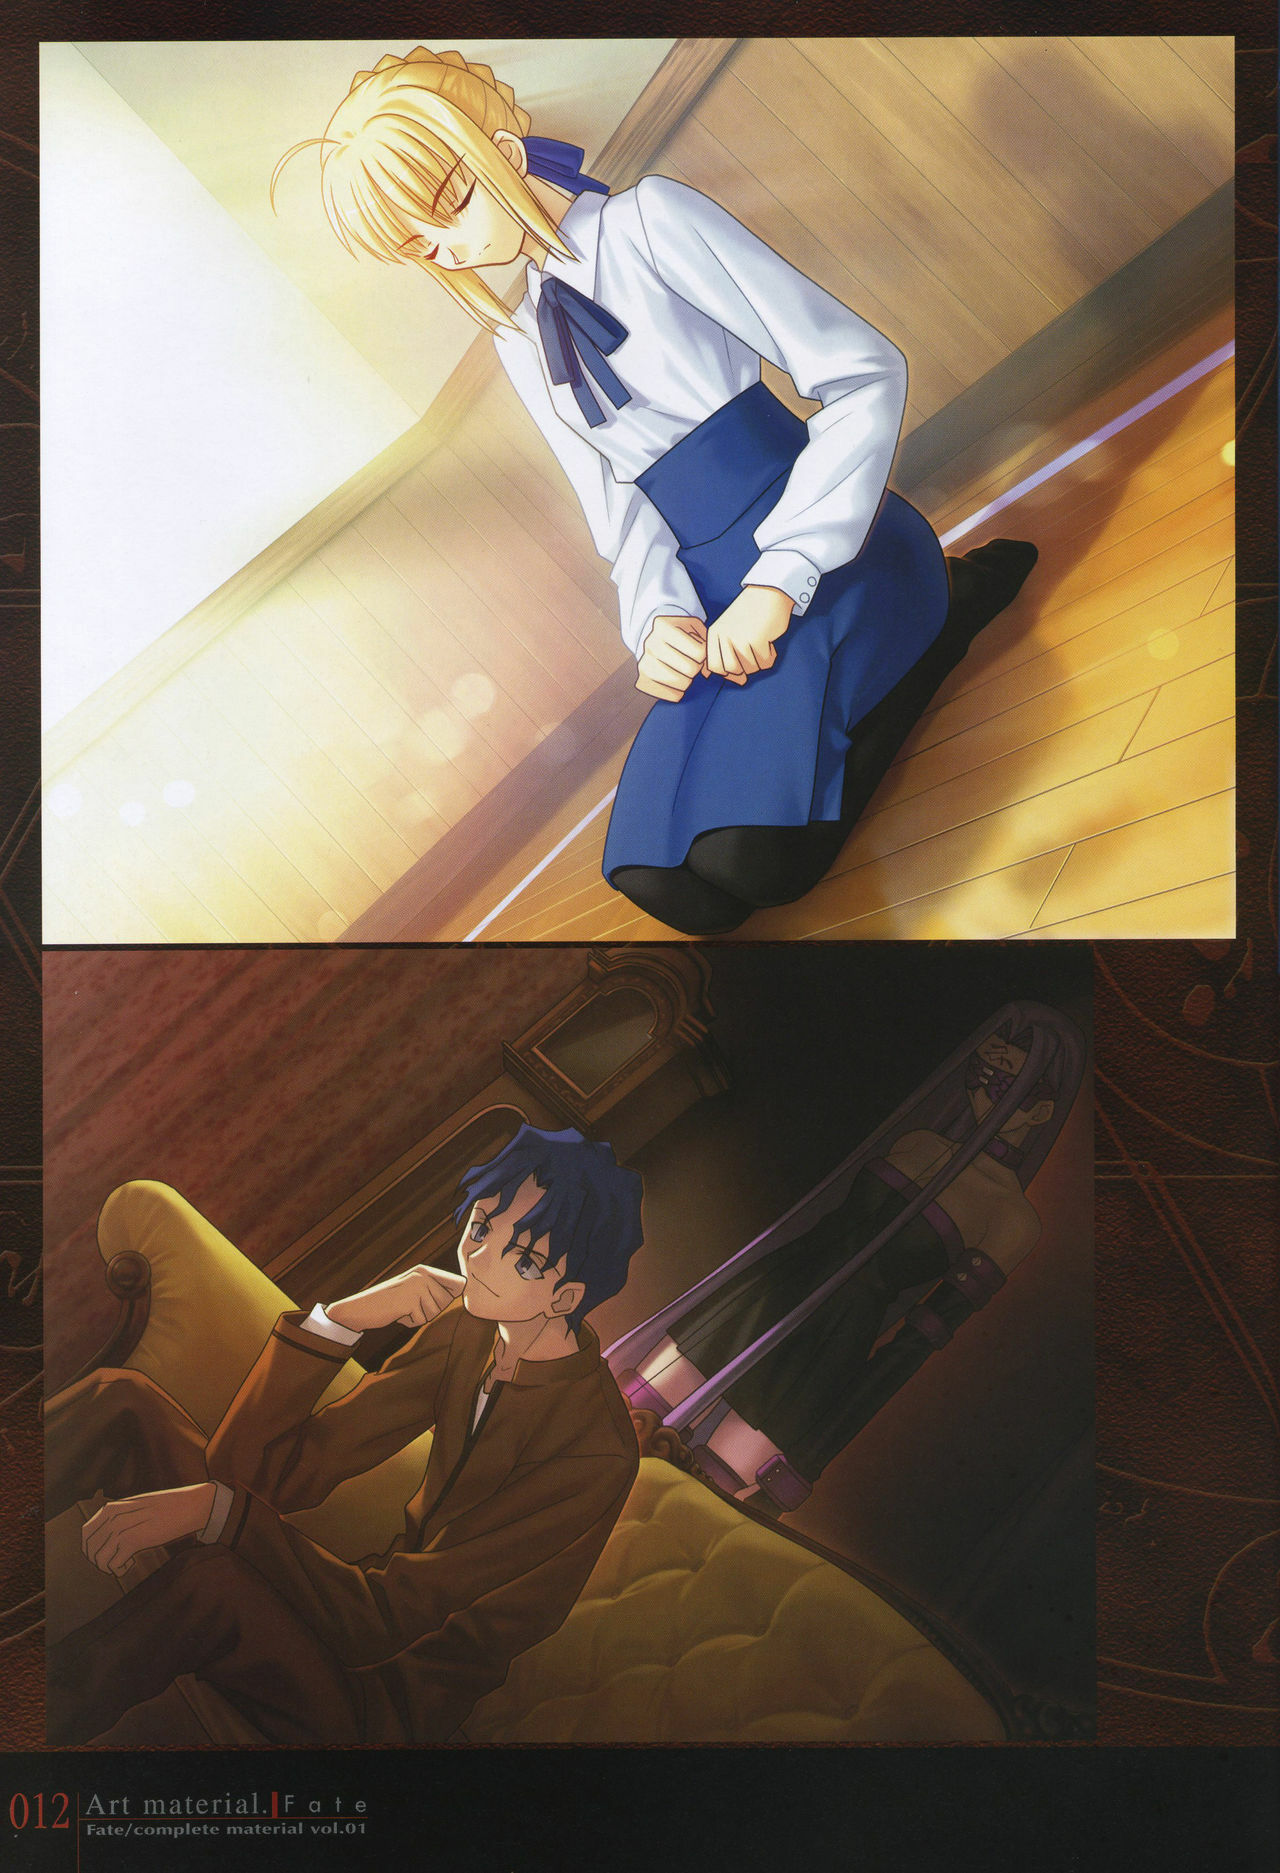 [Type-Moon] Fate/complete material I - Art material. page 17 full